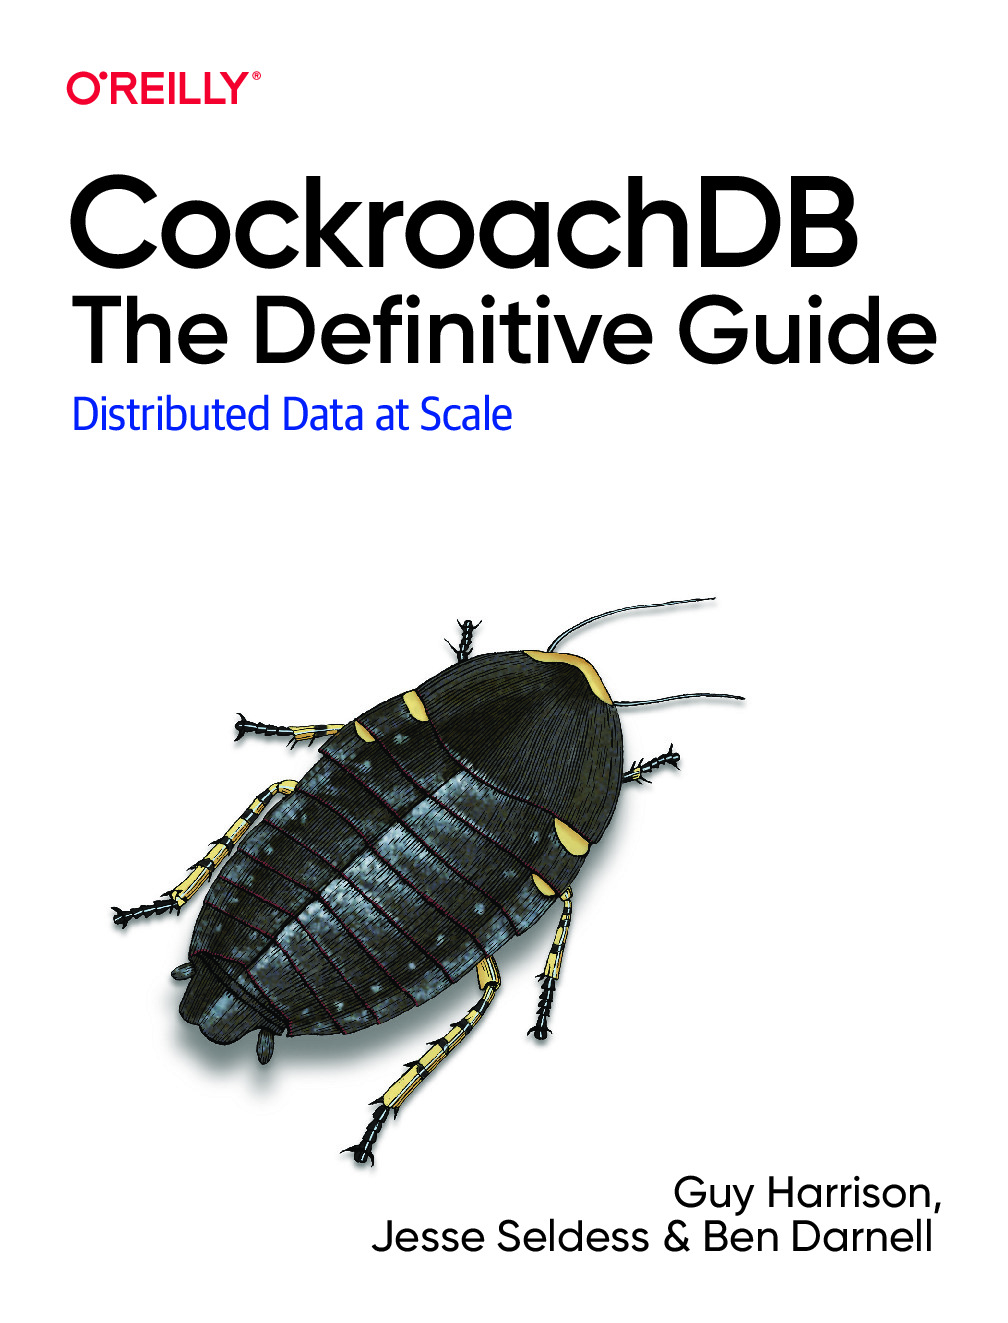 Guy Harrison, Jesse Seldess, Ben Darnell – CockroachDB_ The Definitive Guide_ Distributed Data at Scale-O’Reilly Media (2022)